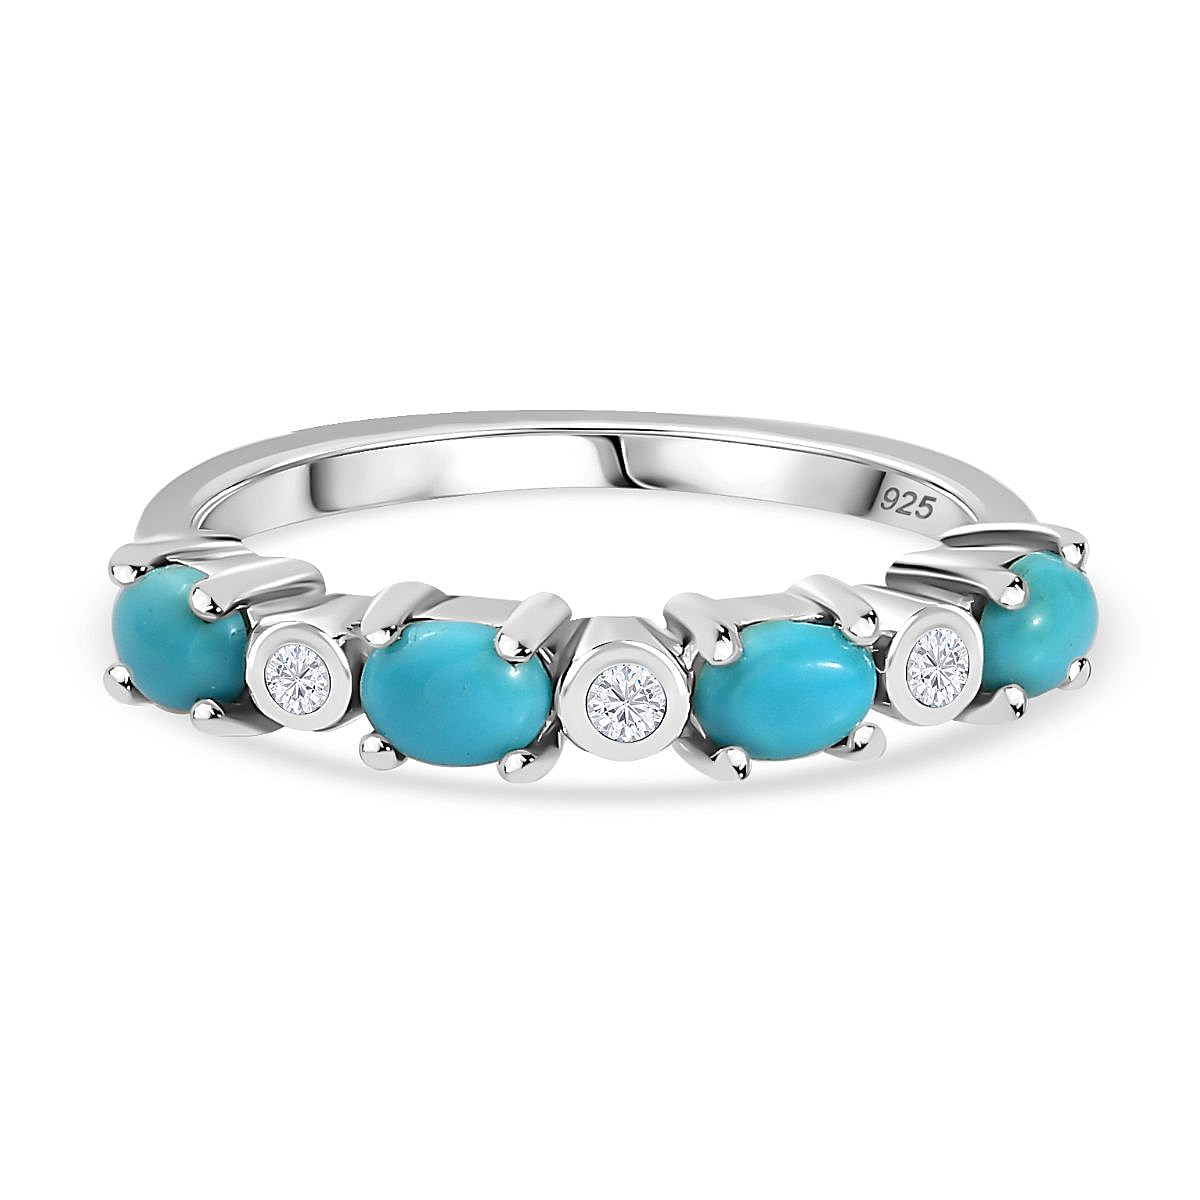 Arizona Sleeping Beauty Turquoise & Natural Zircon Ring in Platinum Overlay Sterling Silver